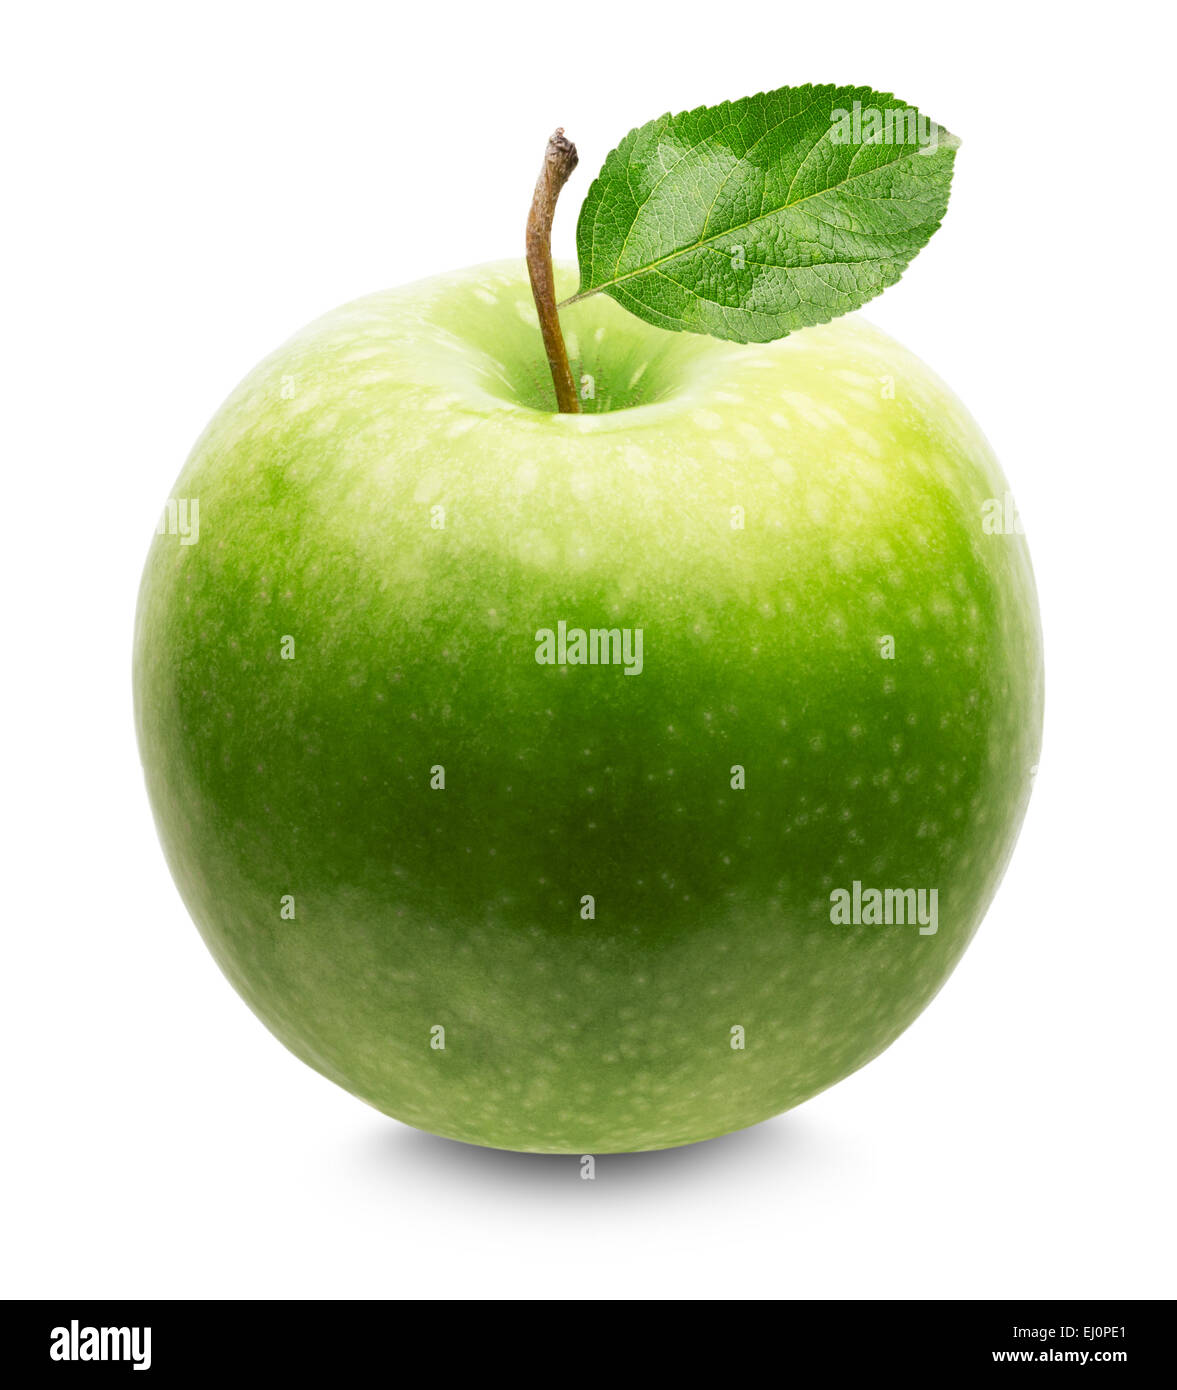 green apple with leaf isolated on the white background. Stock Photo